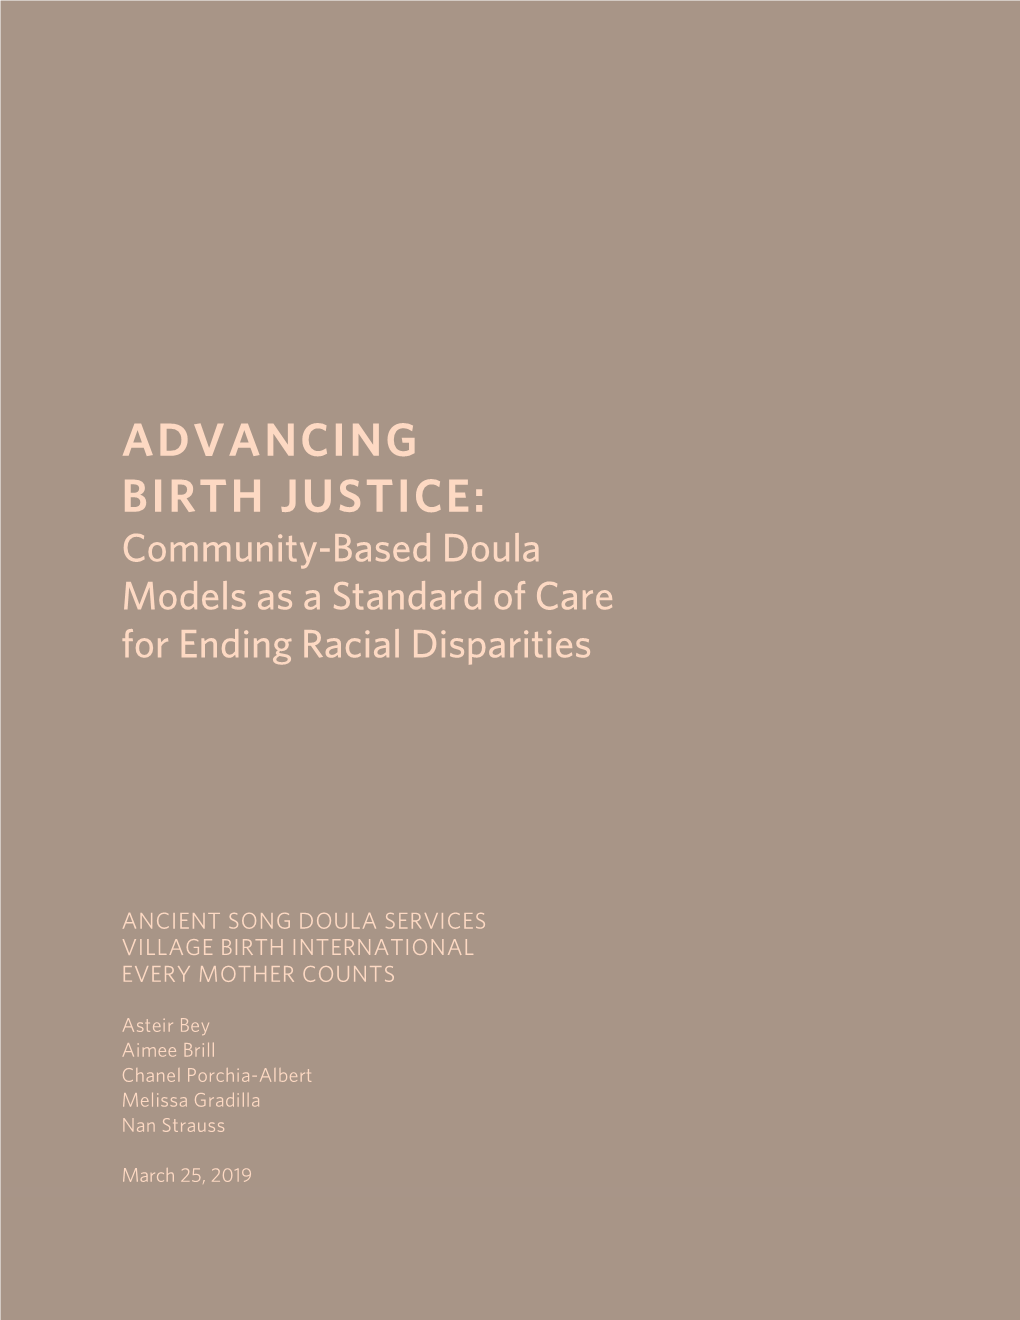 ADVANCING BIRTH JUSTICE: Community-Based Doula Models As a Standard of Care for Ending Racial Disparities